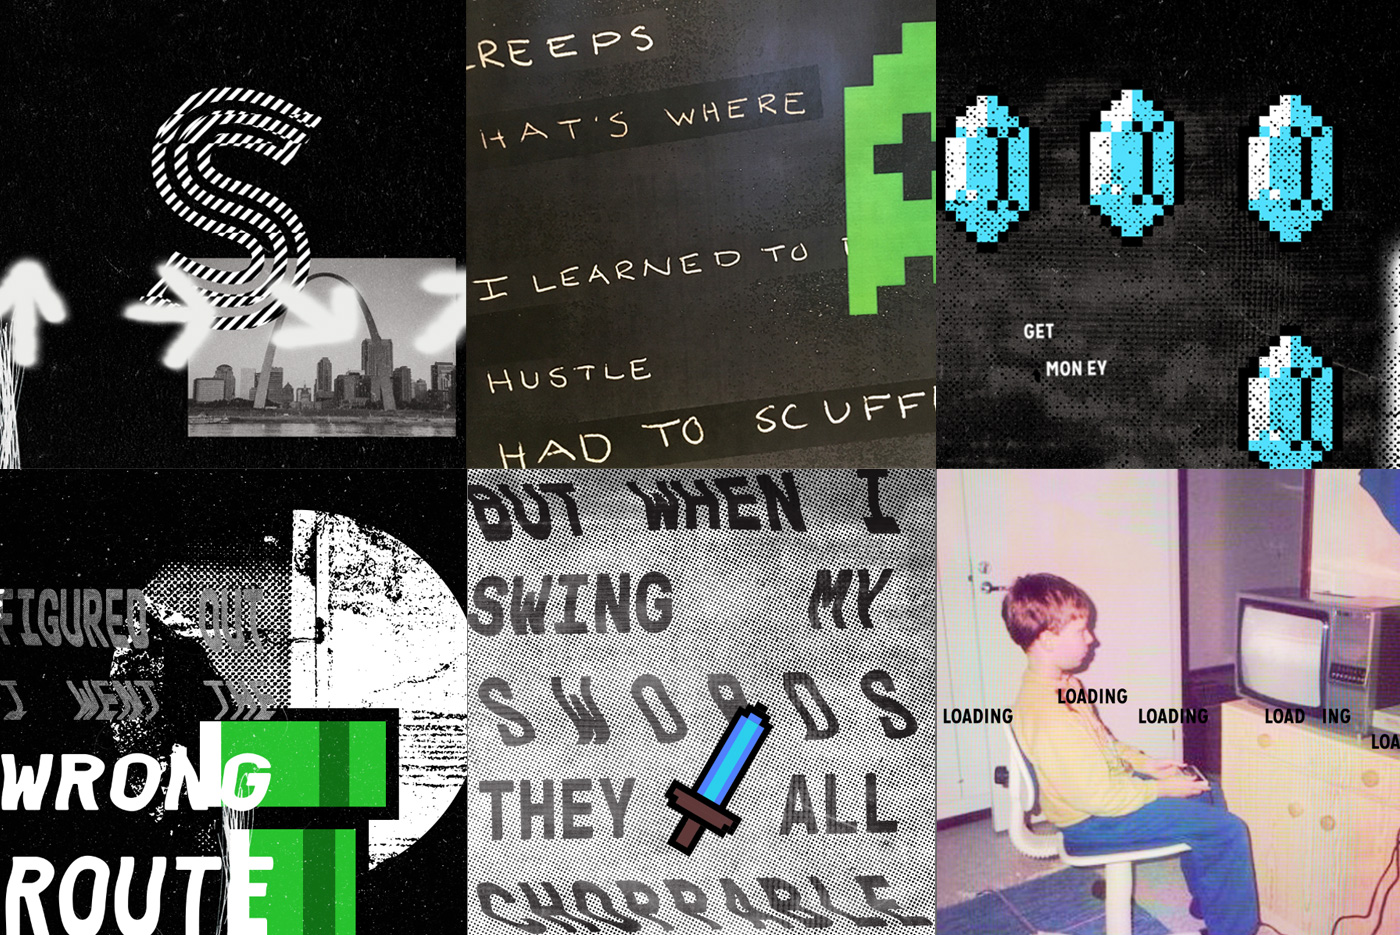 Start Bar branding combines 1990's grunge design with video games and hip hop.